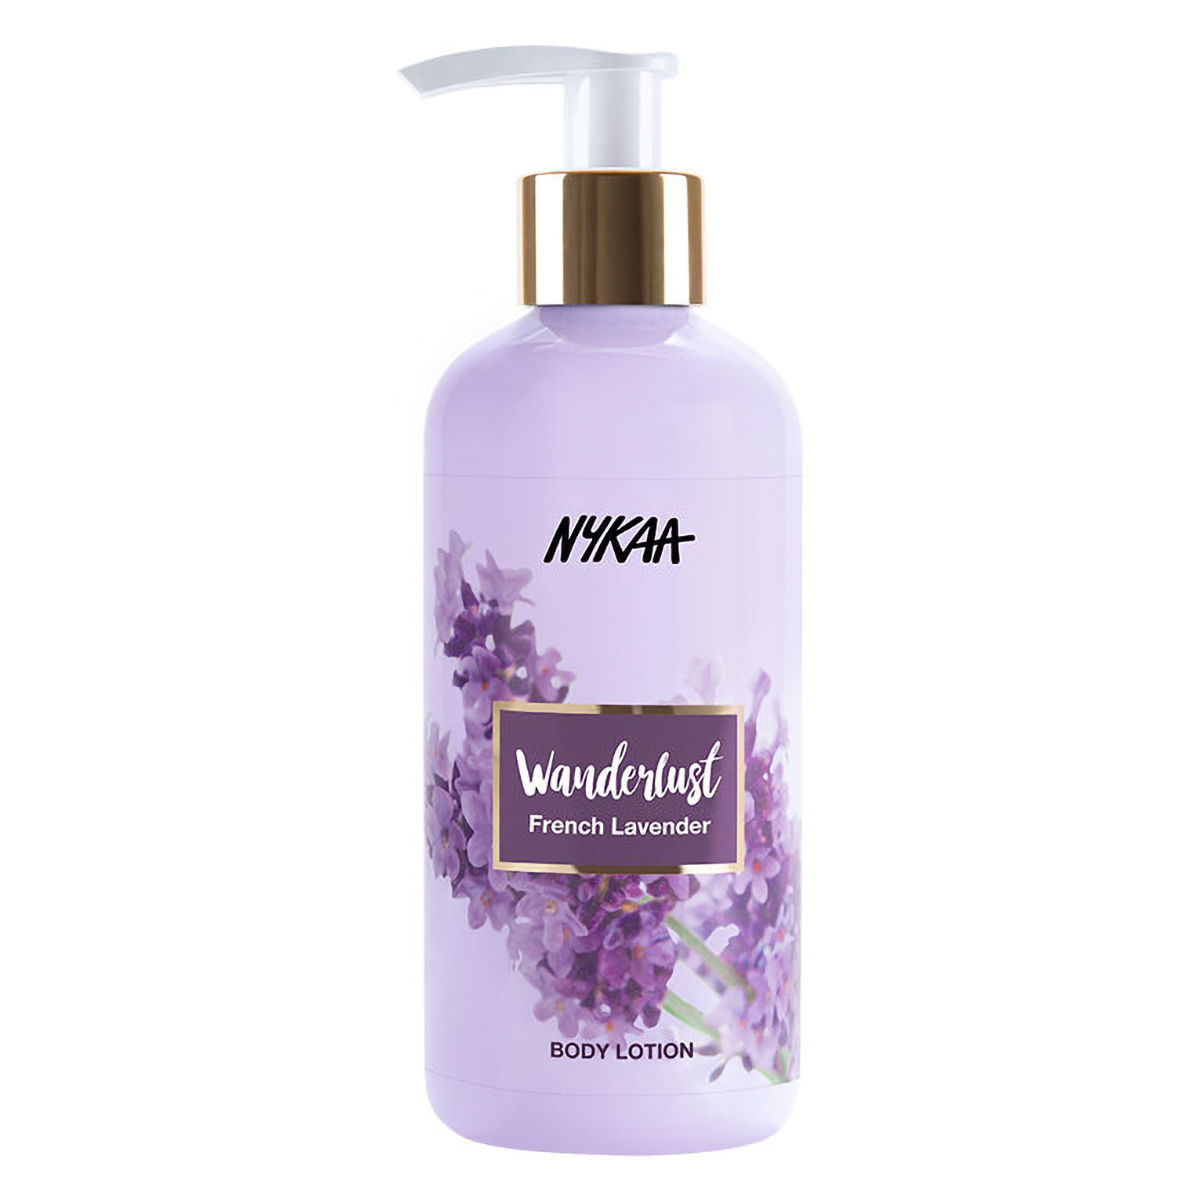 Buy Nykaa Wanderlust French Lavender Body Lotion, 300 ml Online